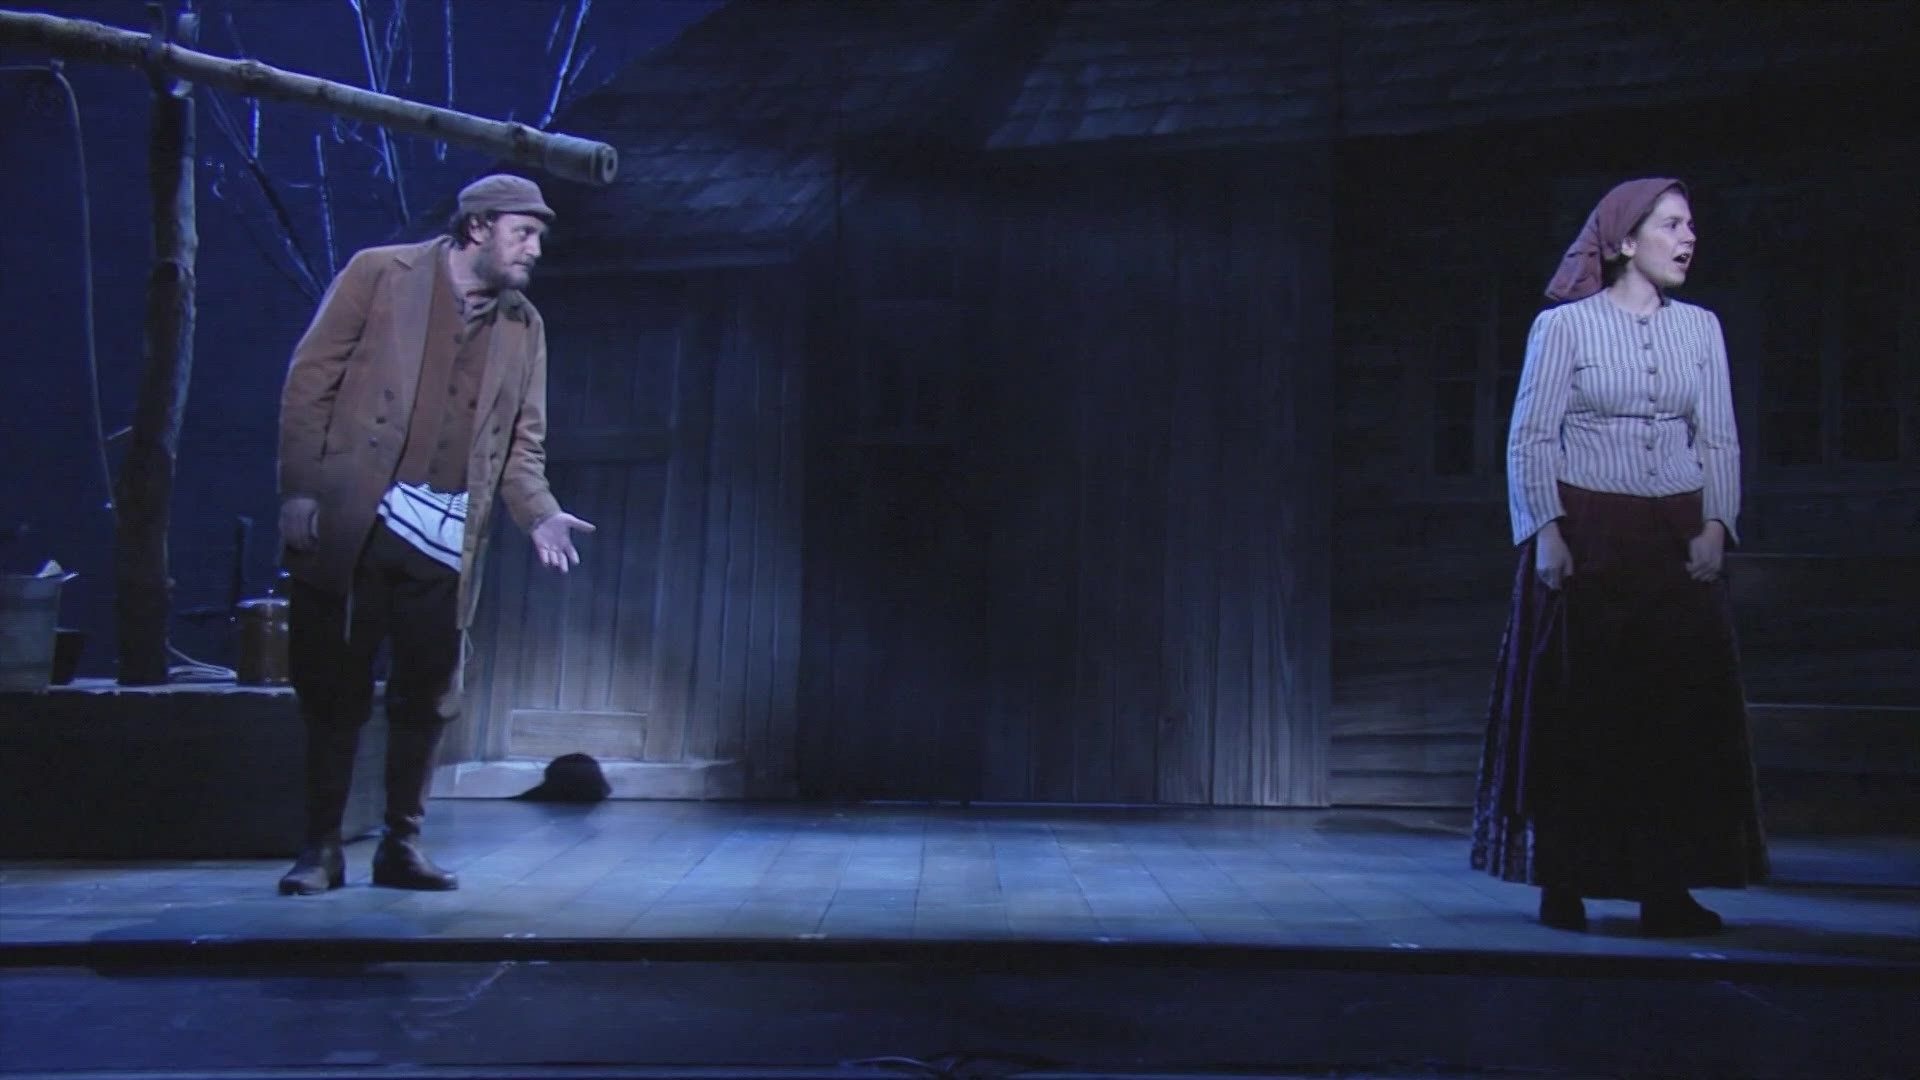 The Tony Award-winning classic "Fiddler on the Roof" will be performed at Denver's Buell Theatre through March 19.